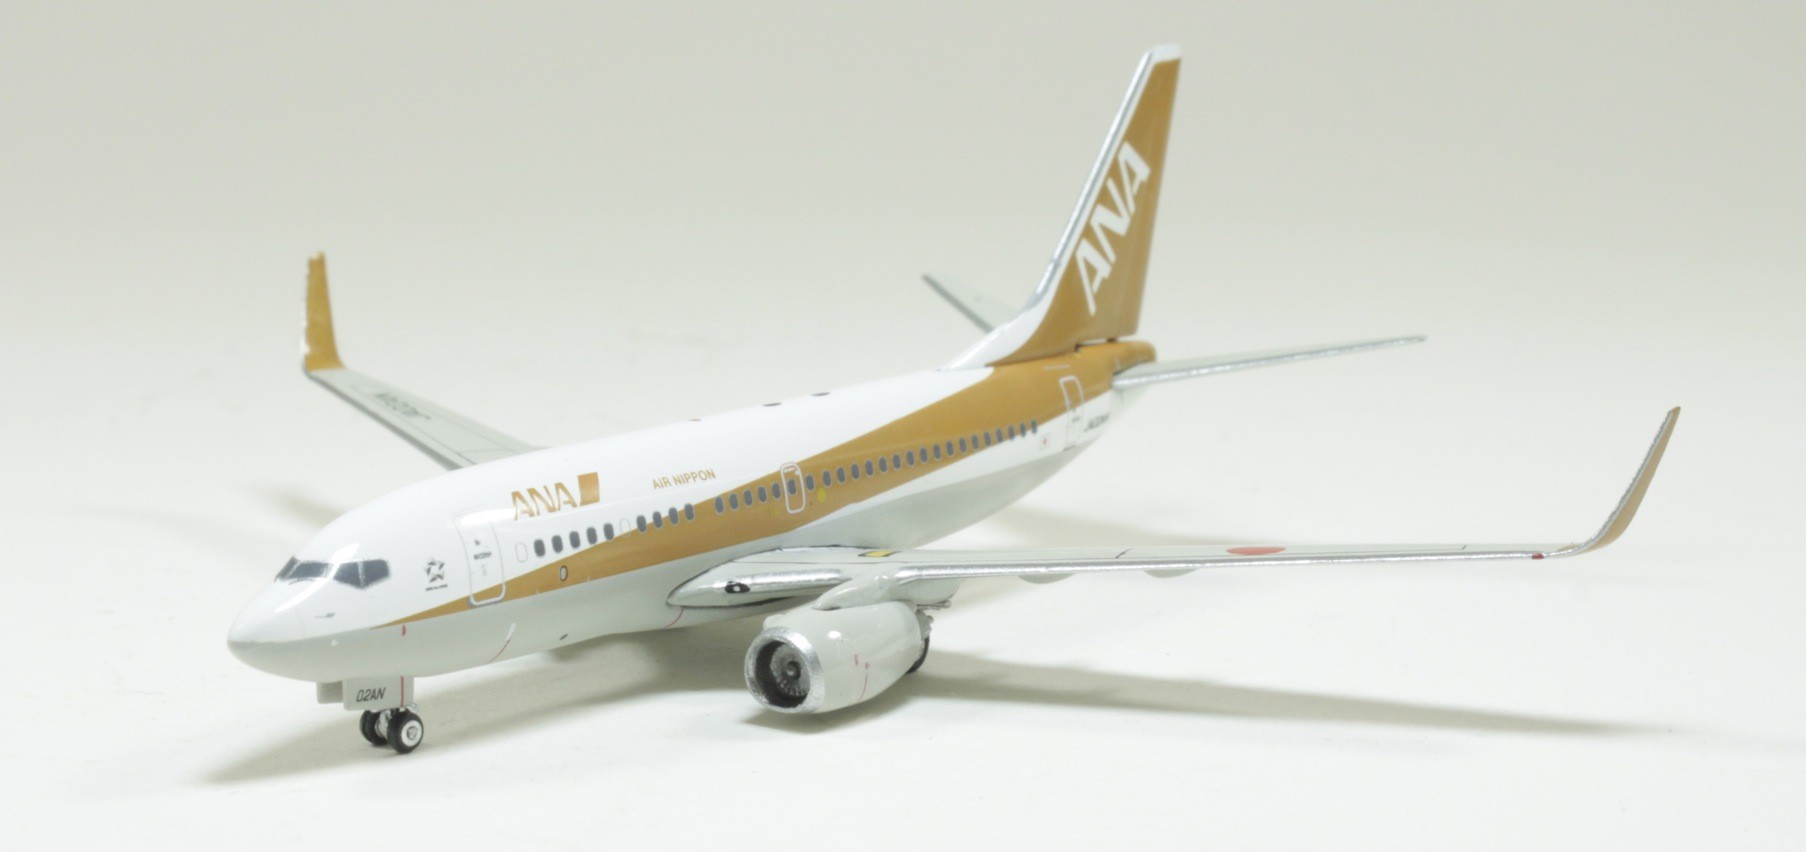 Phoenix Model Die cast Airliners 1:400 Scale ANA All Nippon 